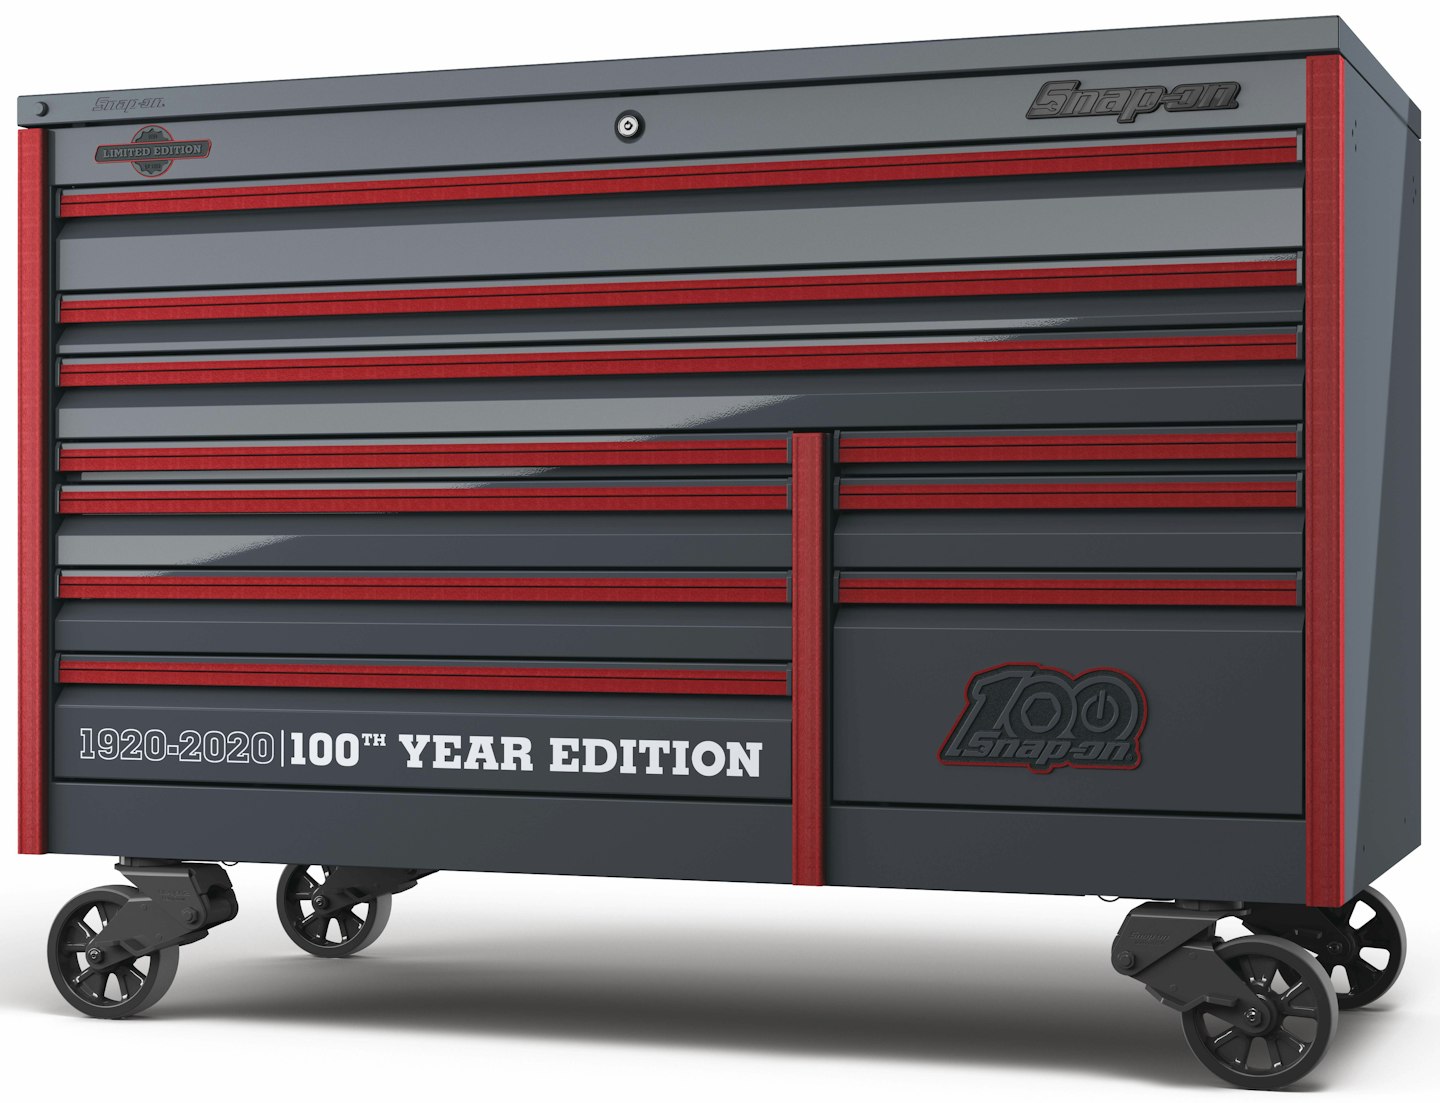 Snapon releases specialedition toolbox Trucks, Parts, Service